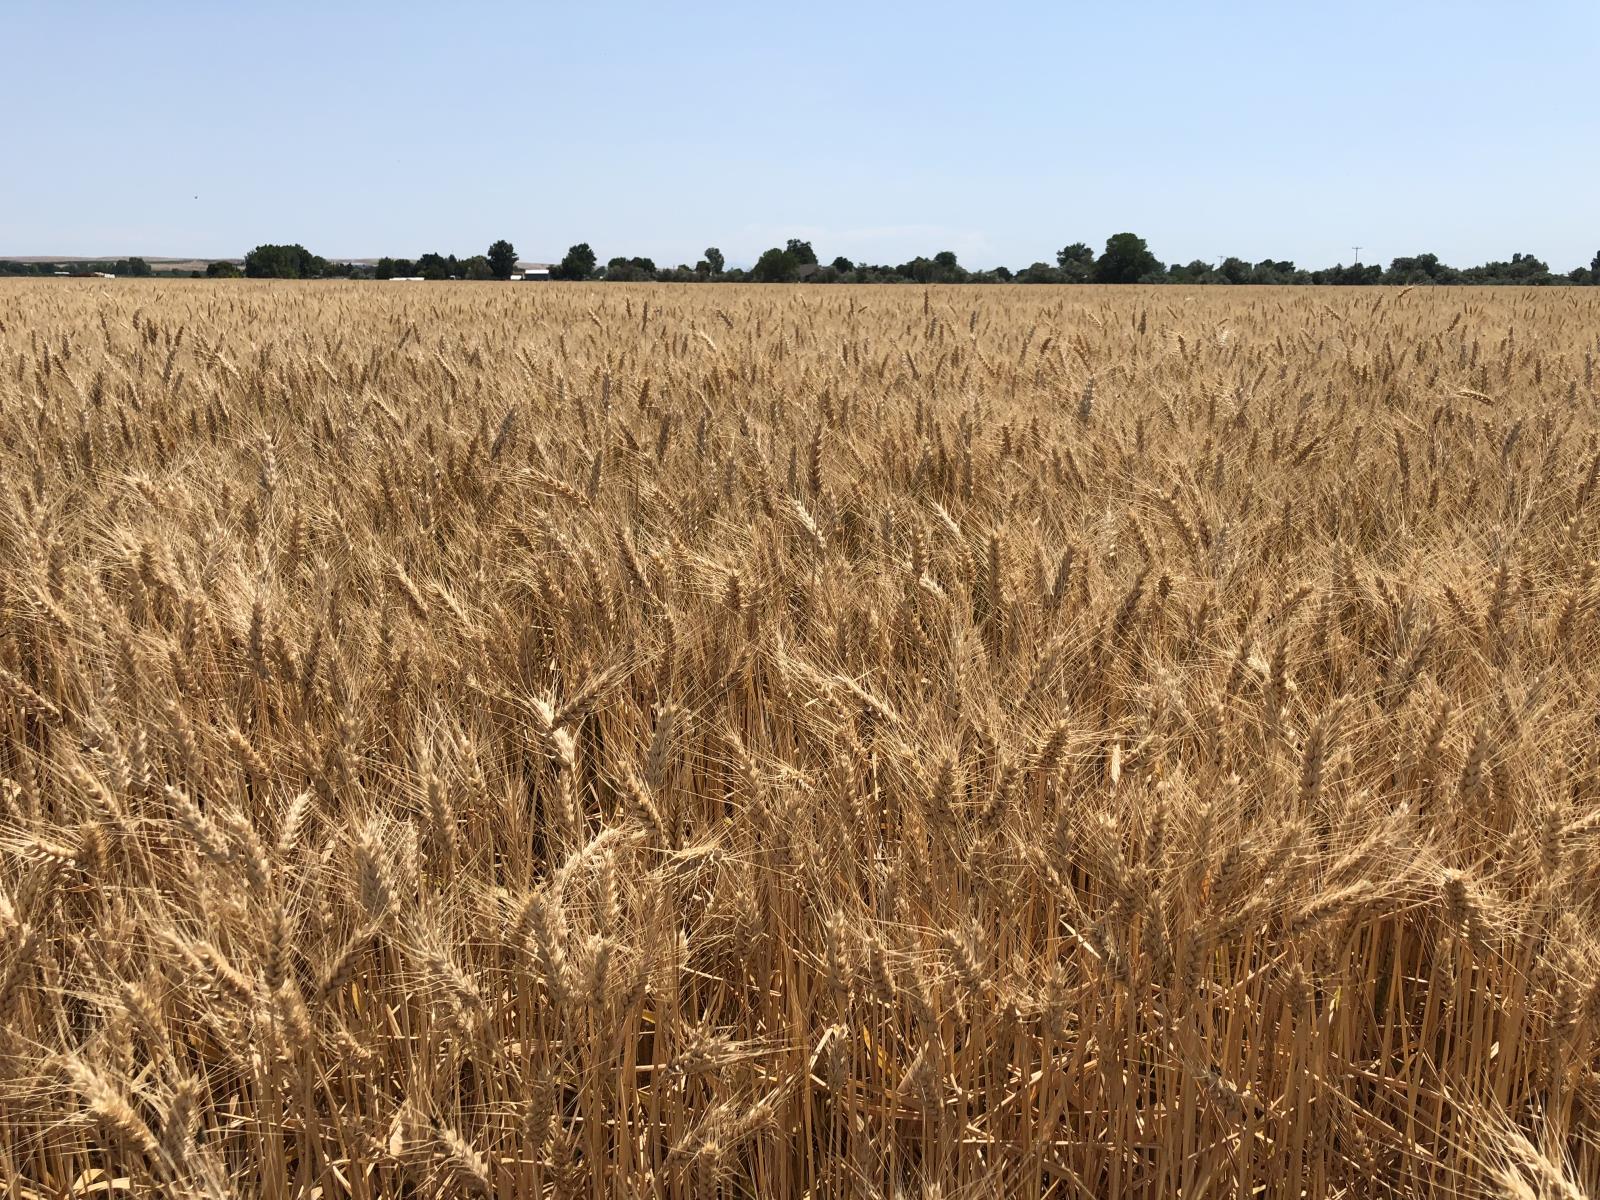 Wheat grows in a field near Parma in this photo taken in early July. Severe drought and heat are expected to result in Idaho’s total wheat production being down significantly this year. 